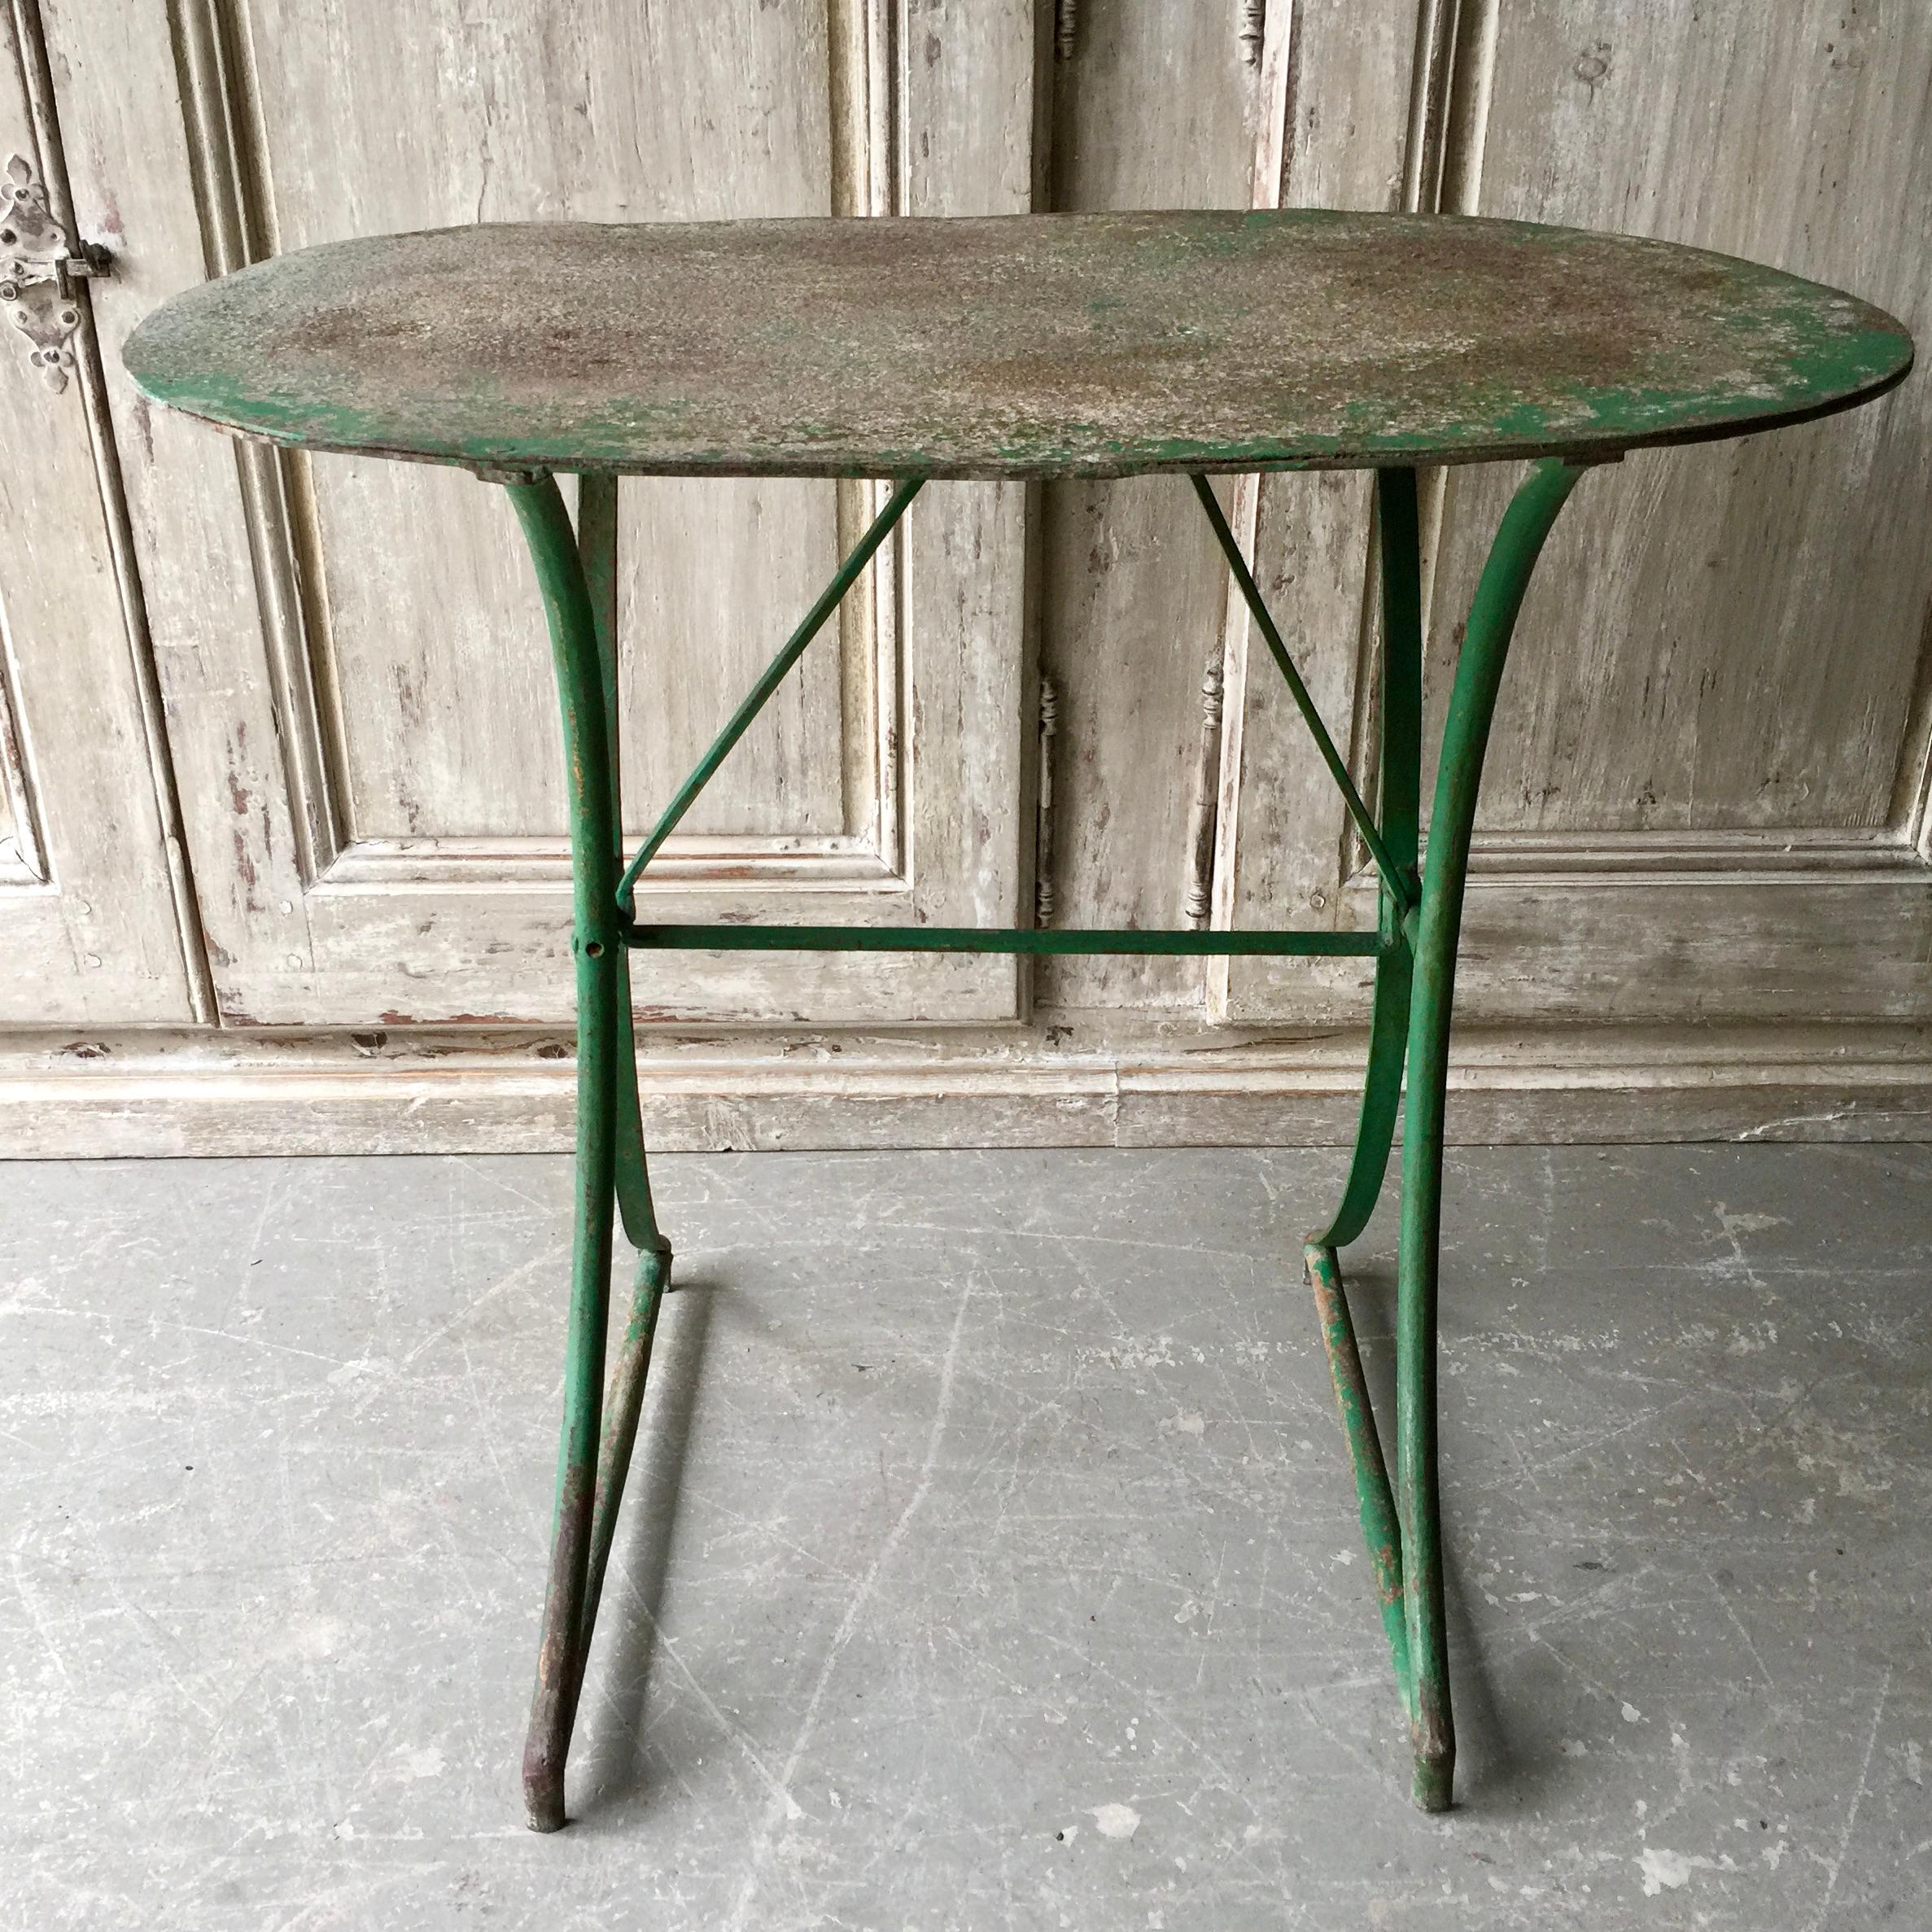 Charming French 19th century oval double pedestal base Bistro table in original worn rustic patina.

   